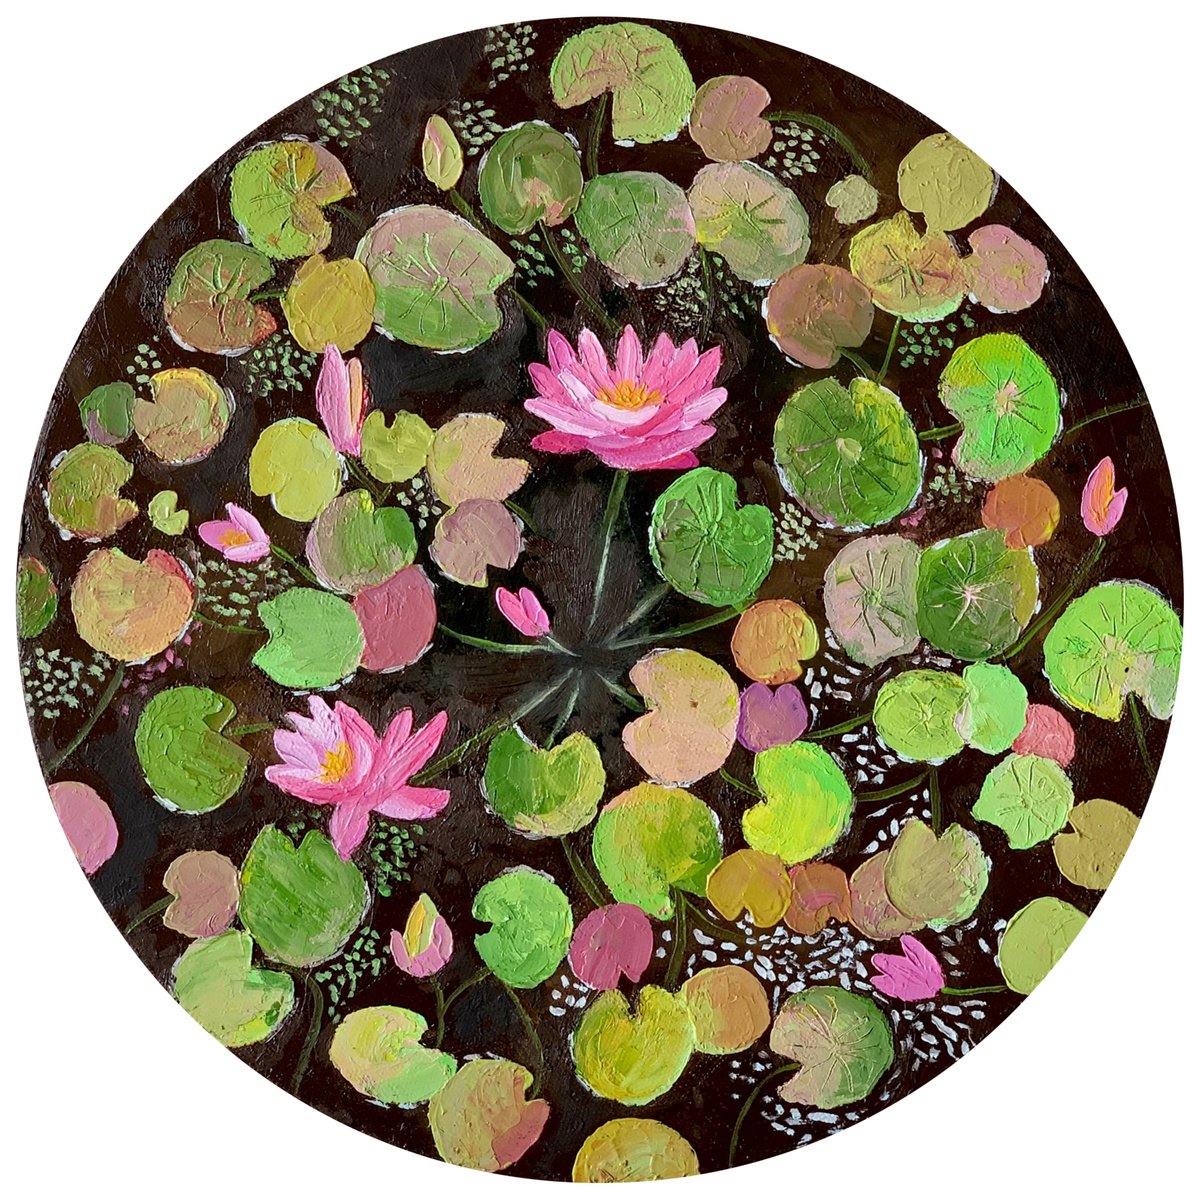 Muddy Water Lilies pond ! Ready to hang by Amita Dand